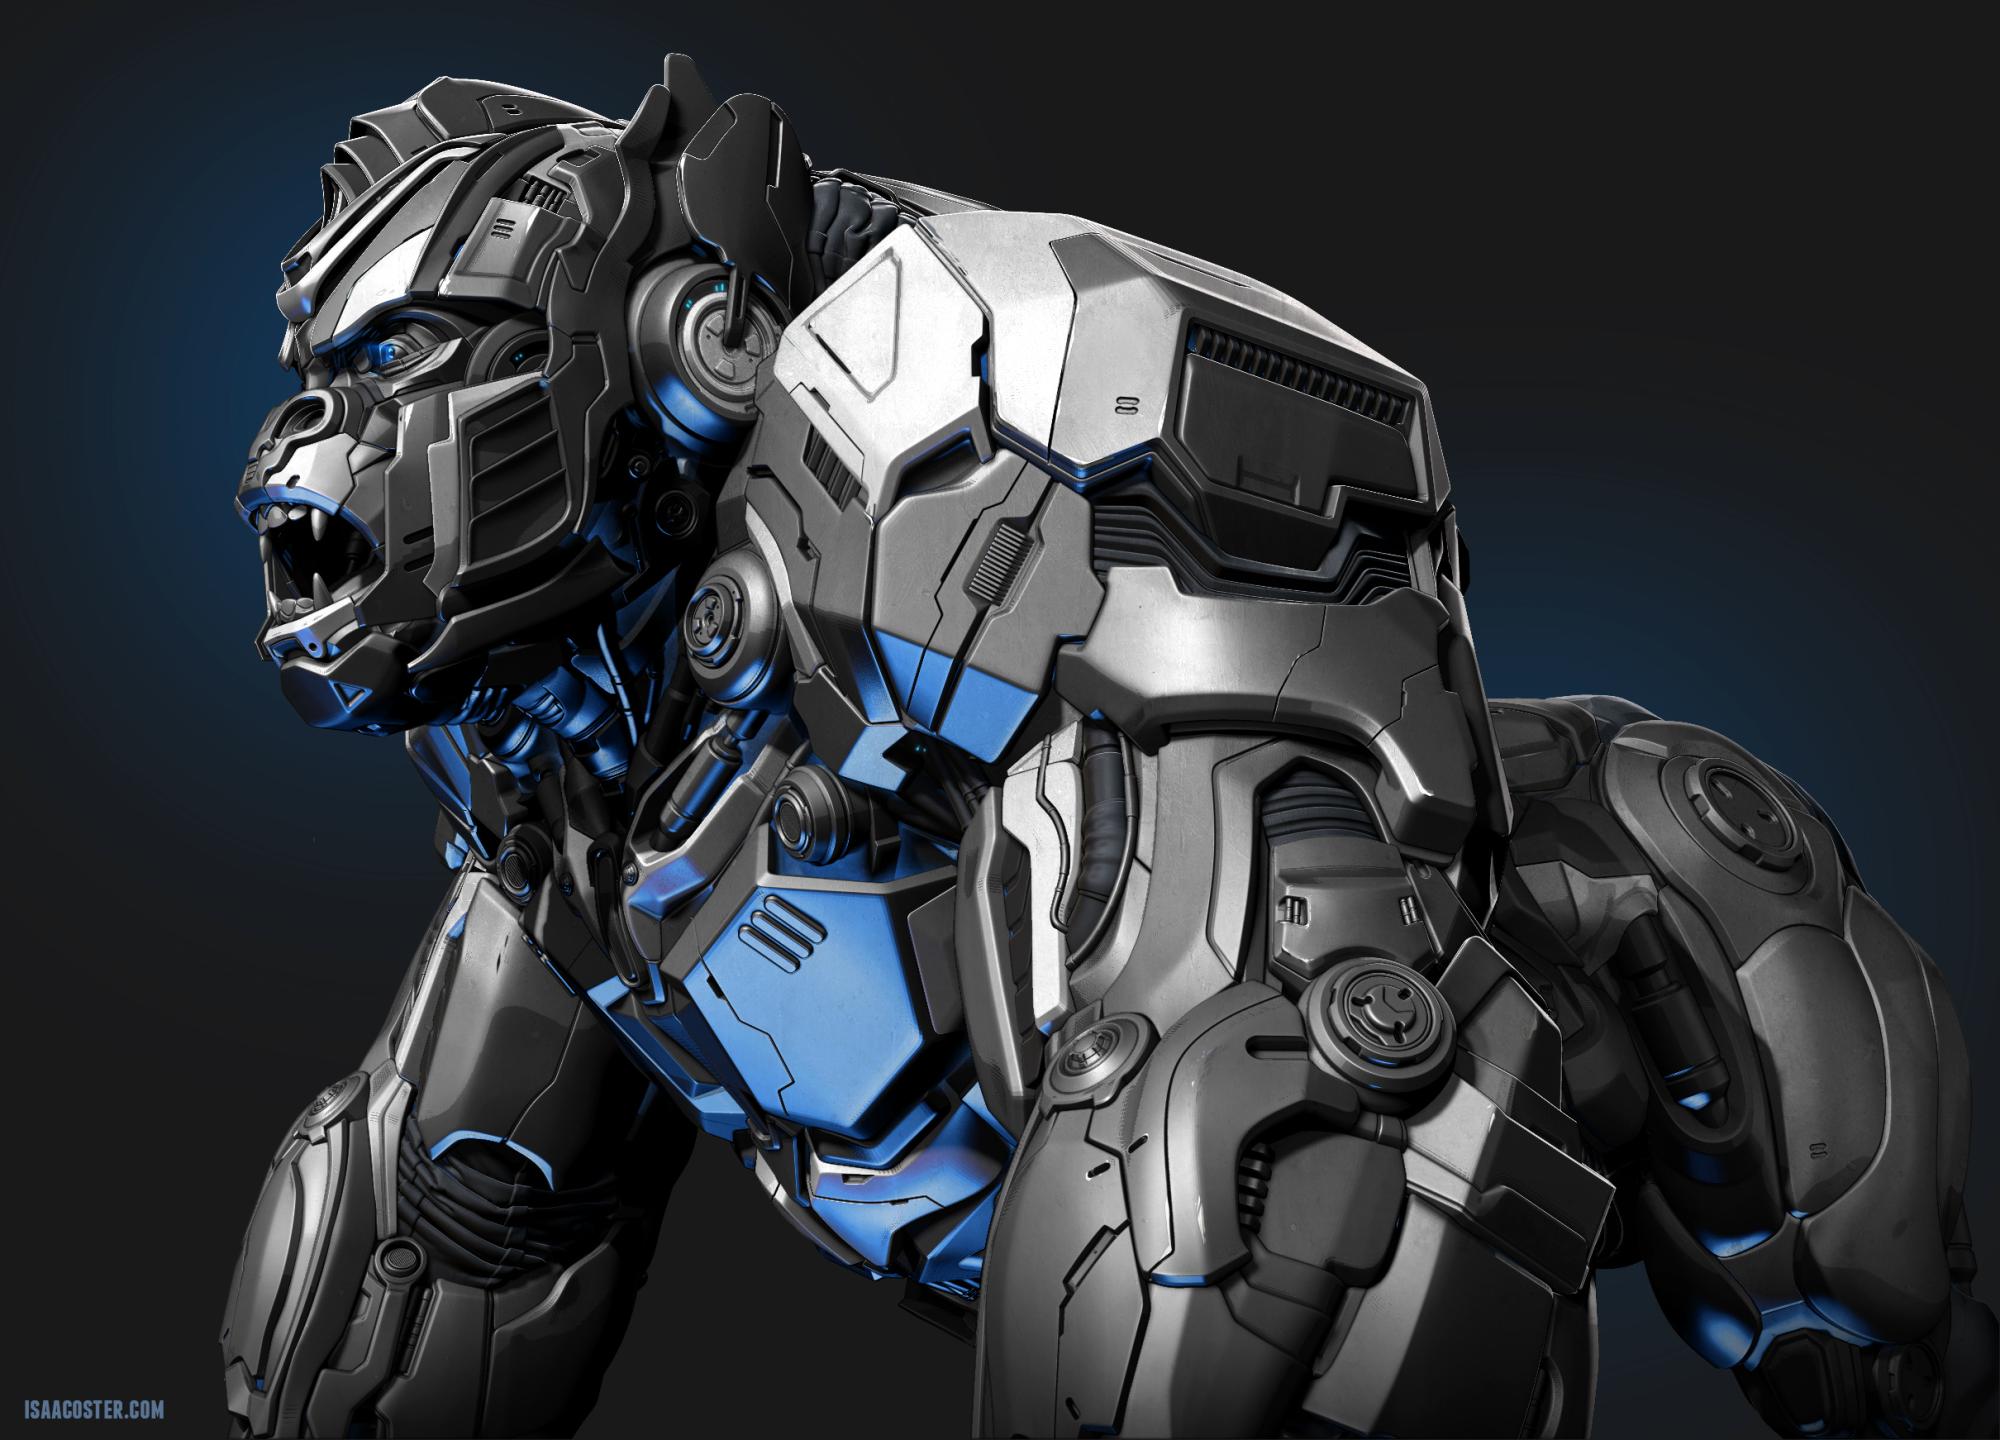 3D model of Optimus Primal created by AET Professor Isaac Oster